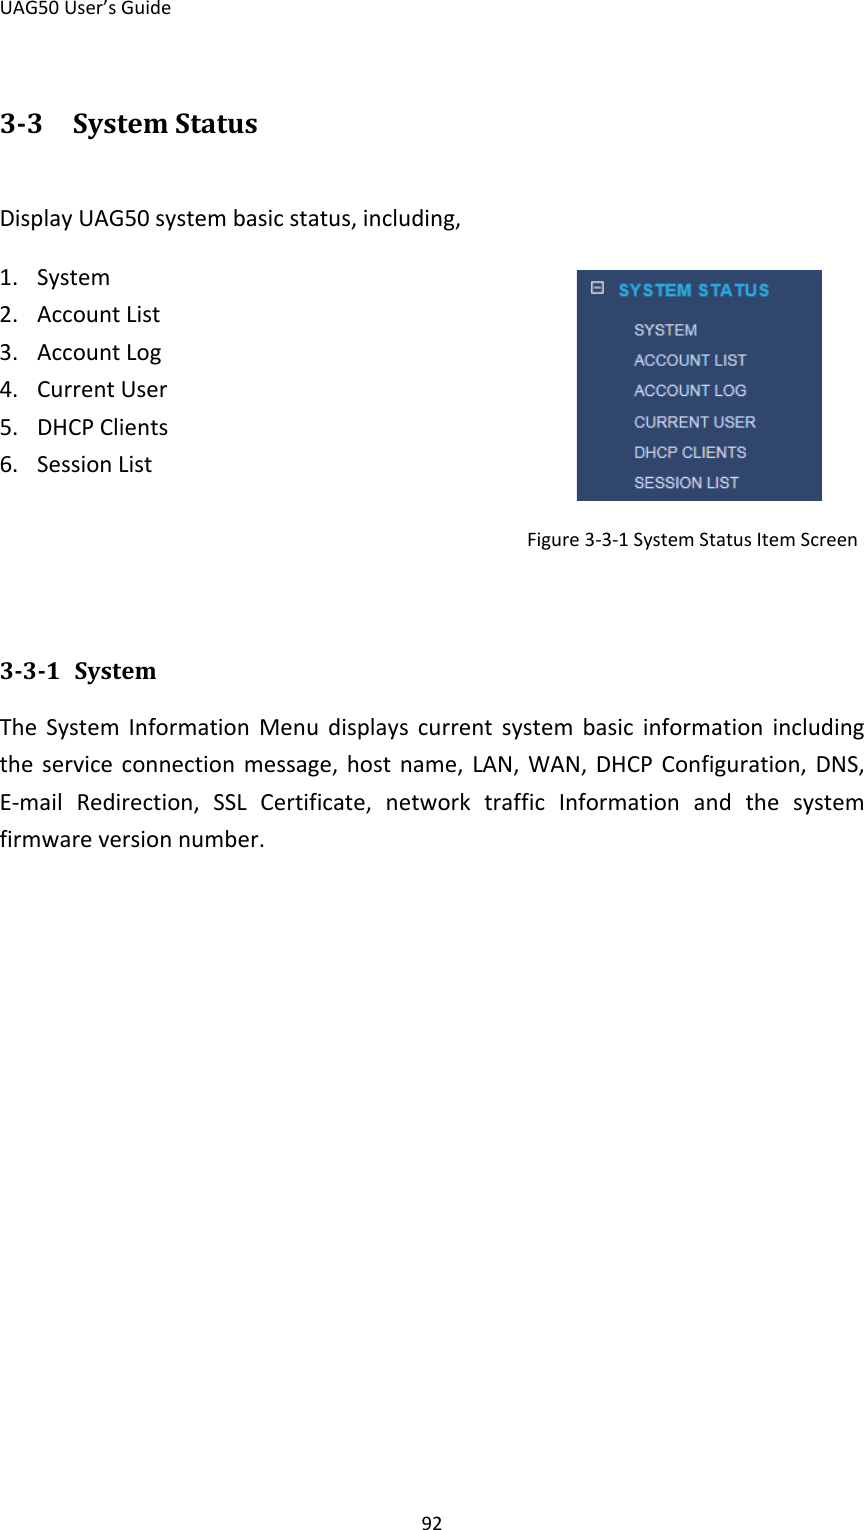 UAG50 User’s Guide 92 3-3 System Status Display UAG50 system basic status, including, 1. System   2. Account List 3. Account Log 4. Current User 5. DHCP Clients 6. Session List                                                      Figure 3-3-1 System Status Item Screen   3-3-1 System The System Information Menu displays current system basic information including the service connection message, host name, LAN, WAN, DHCP Configuration, DNS, E-mail Redirection, SSL Certificate, network traffic Information and the system firmware version number. 